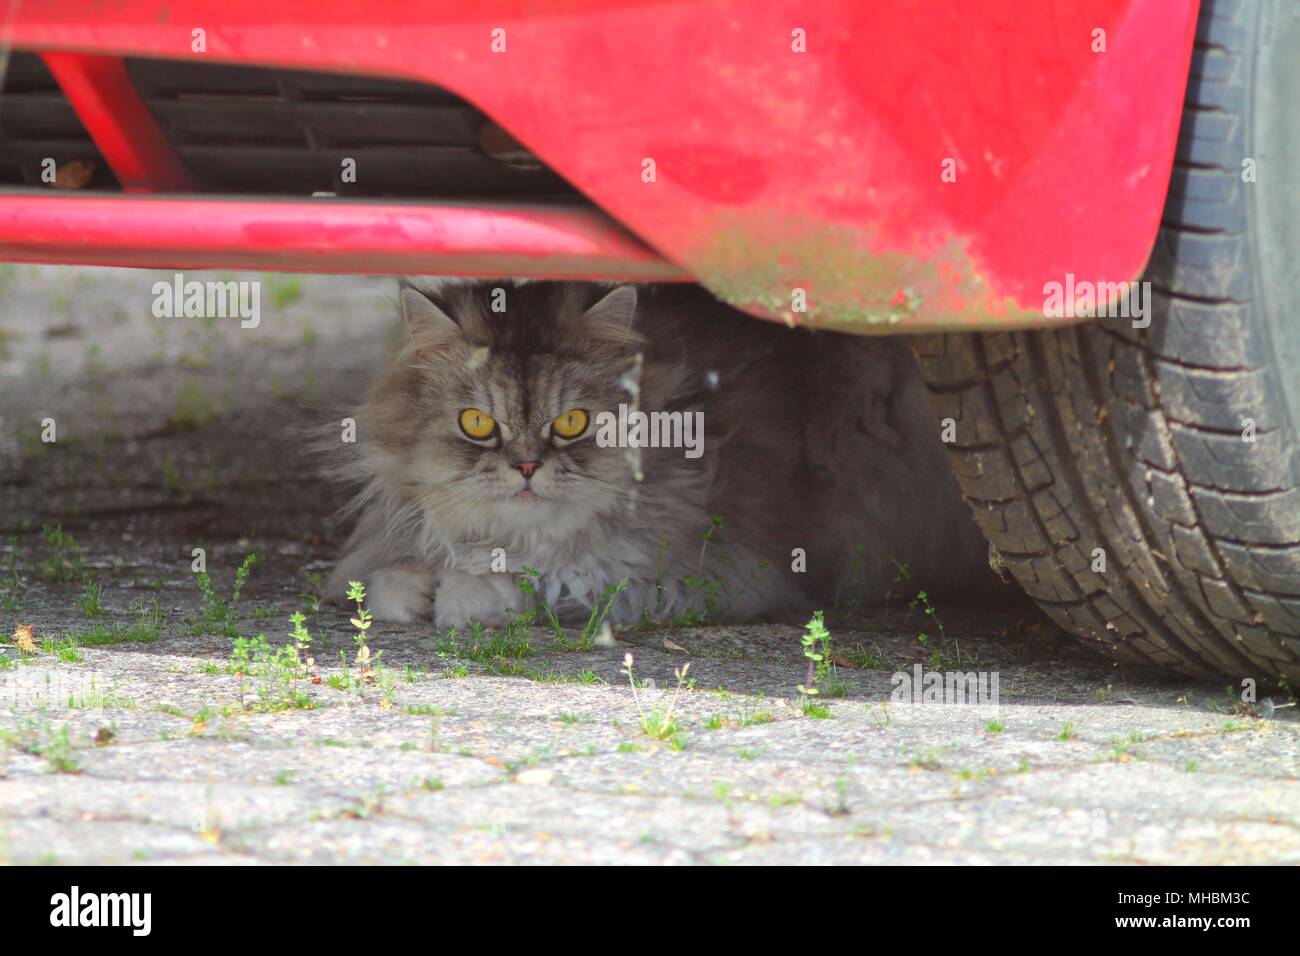 Fluffy grey cat with yellow eyes hidding under dirty red car. Stock Photo